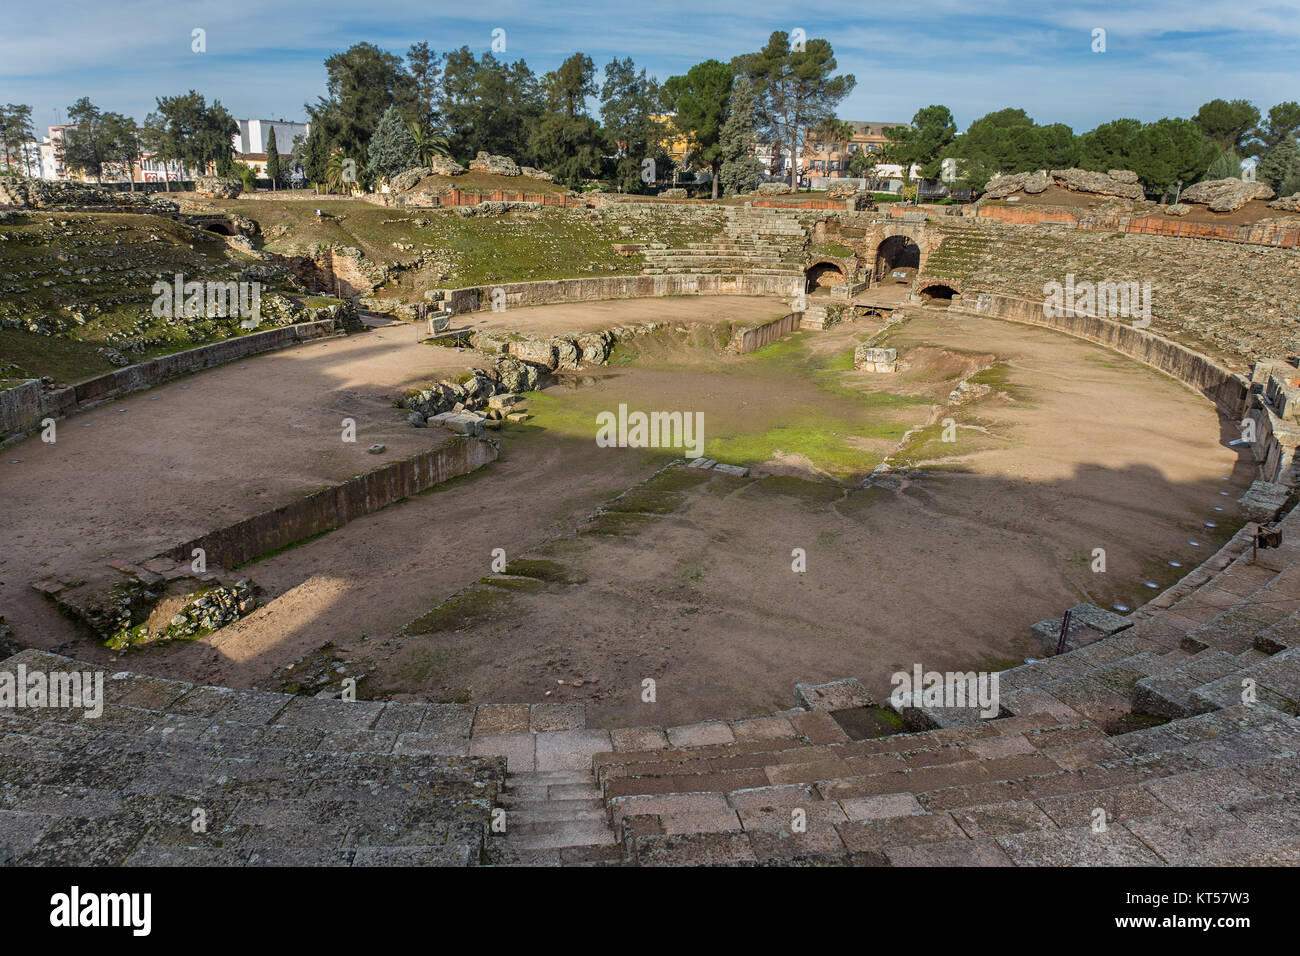 The ancient Roman amphitheater of Emerita Augusta, is one of the major archaeological monuments of Merida. Spain. Stock Photo